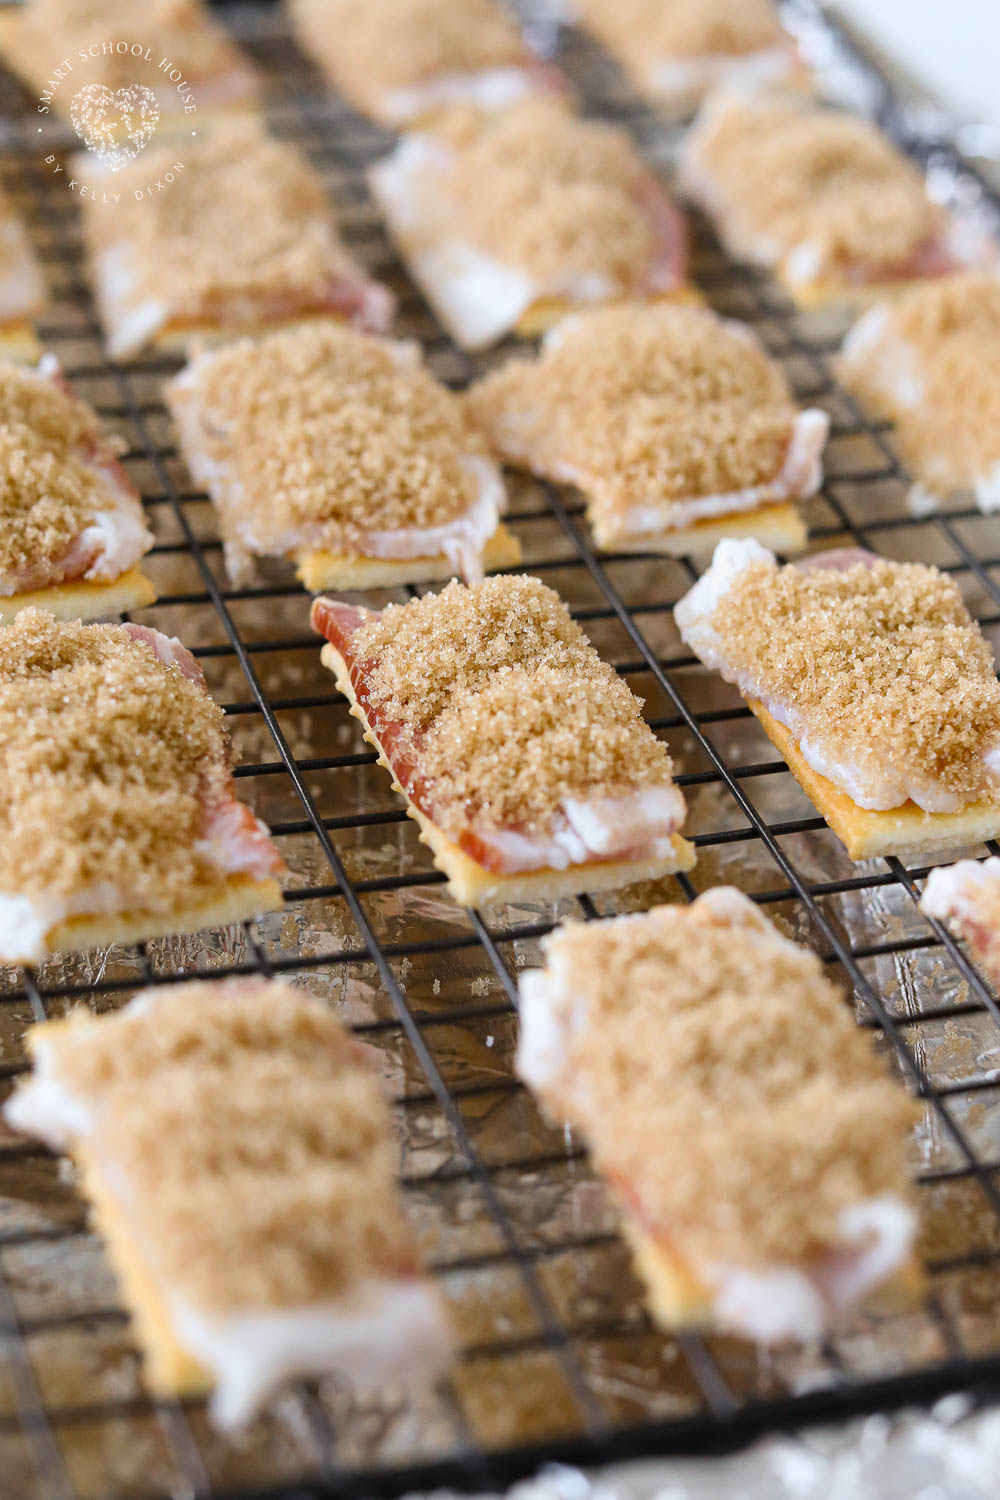 Club crackers with bacon and brown sugar